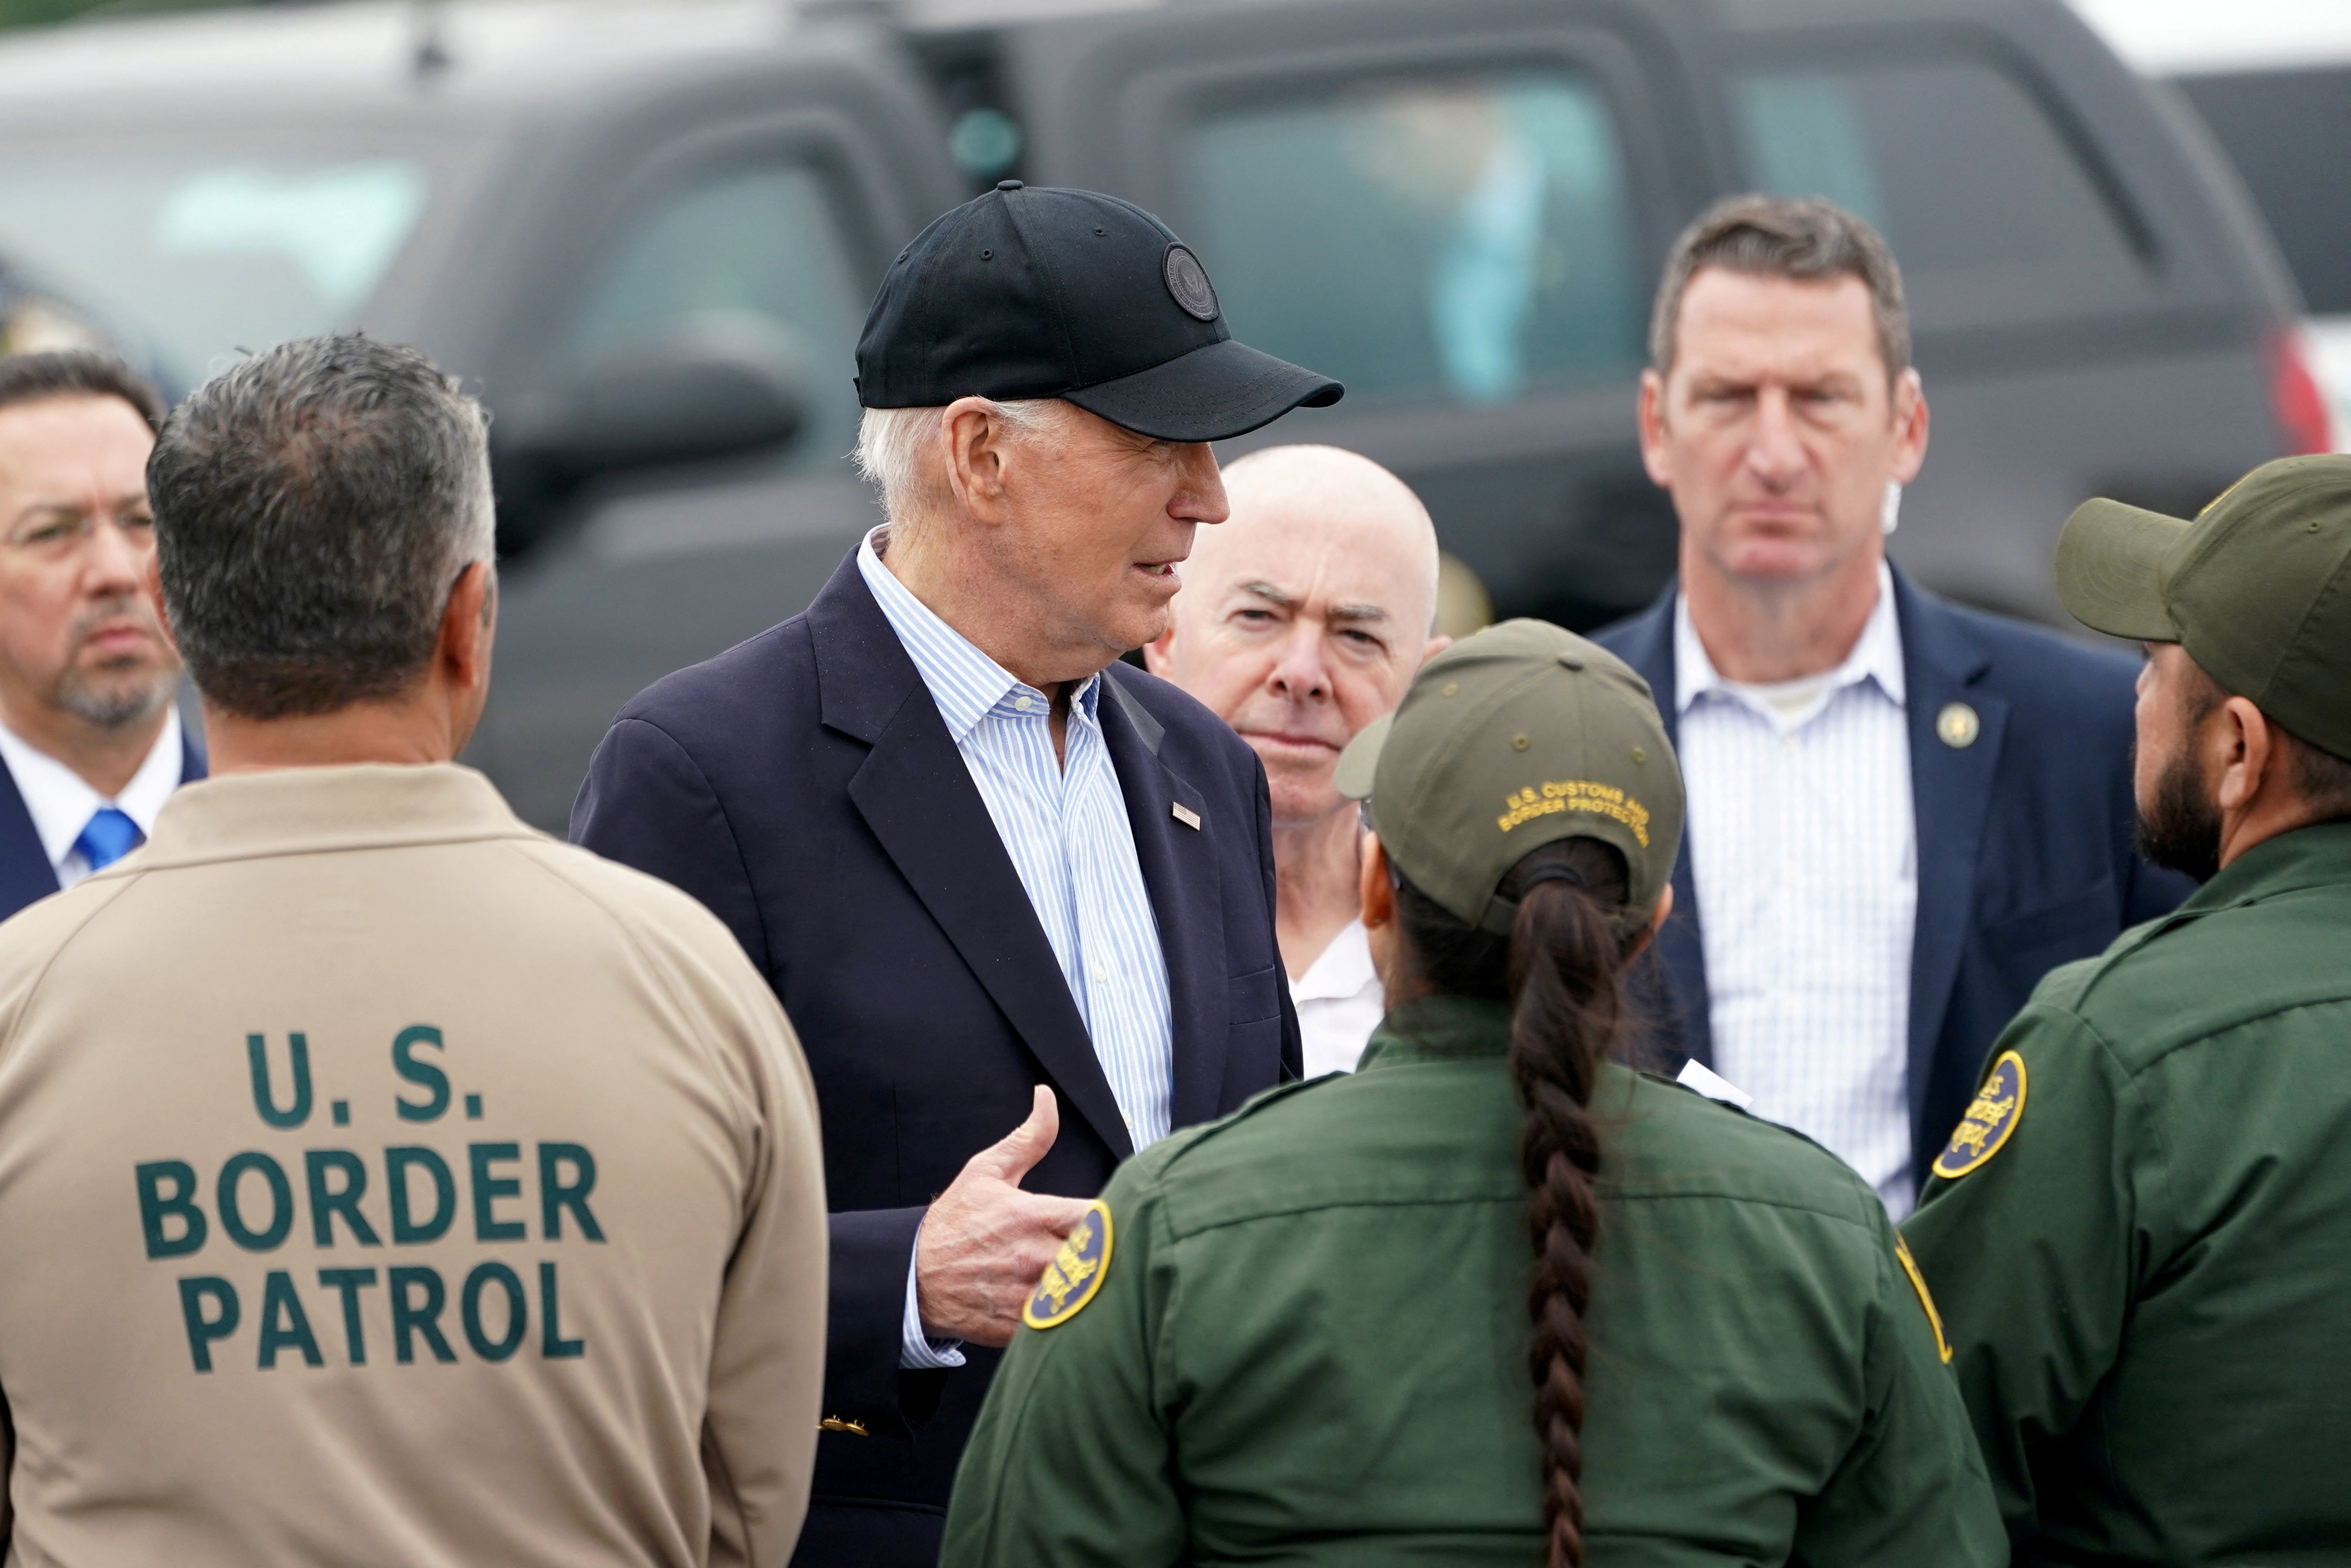 Joe Biden, flanked by US Homeland Security Secretary Alejandro Mayorkas, receives a briefing at the US-Mexico border in Brownsville, Texas